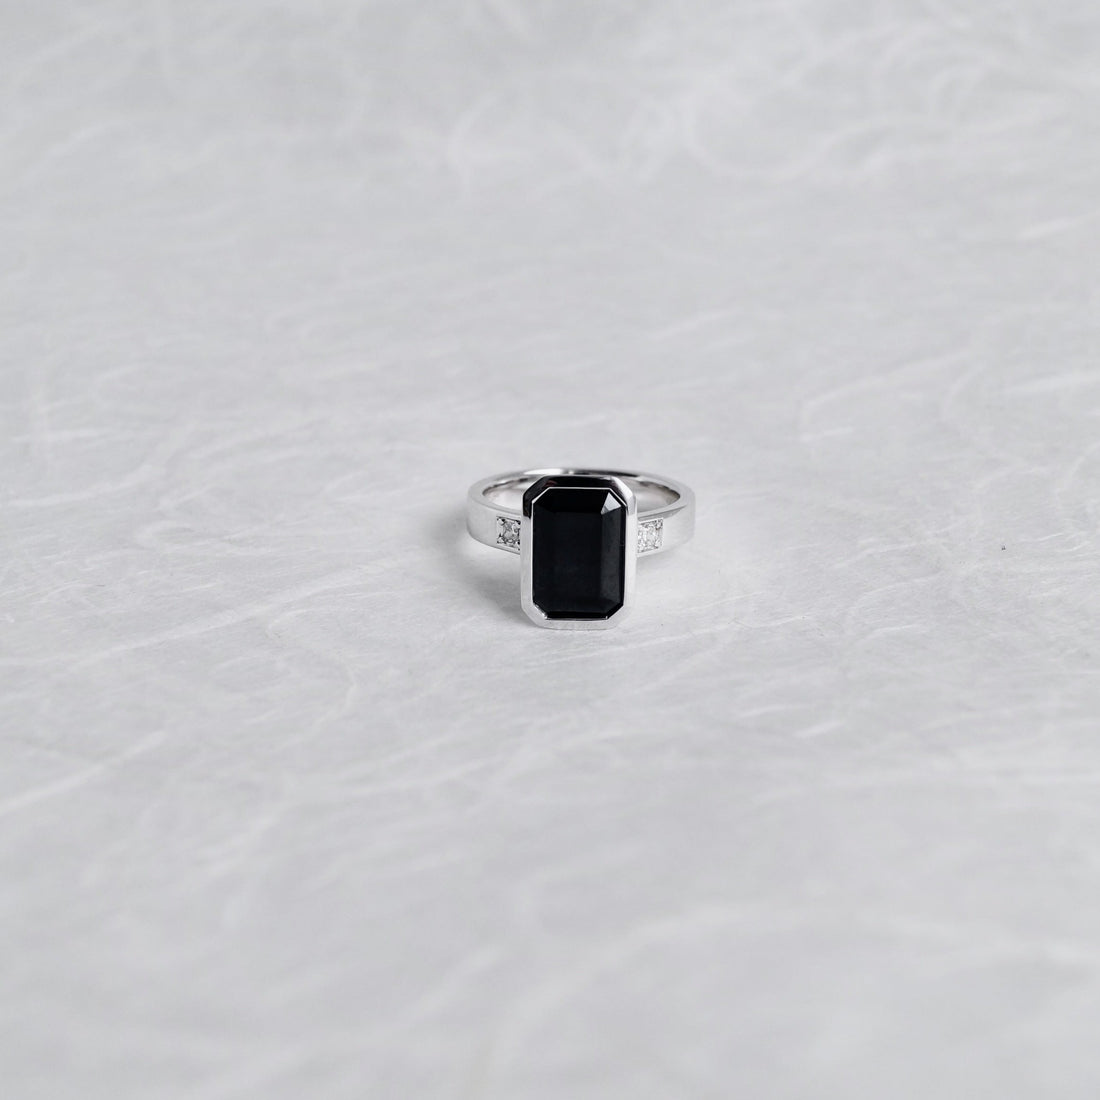 White Gold Tasmanian Black Spinel Ring (Limited Edition)